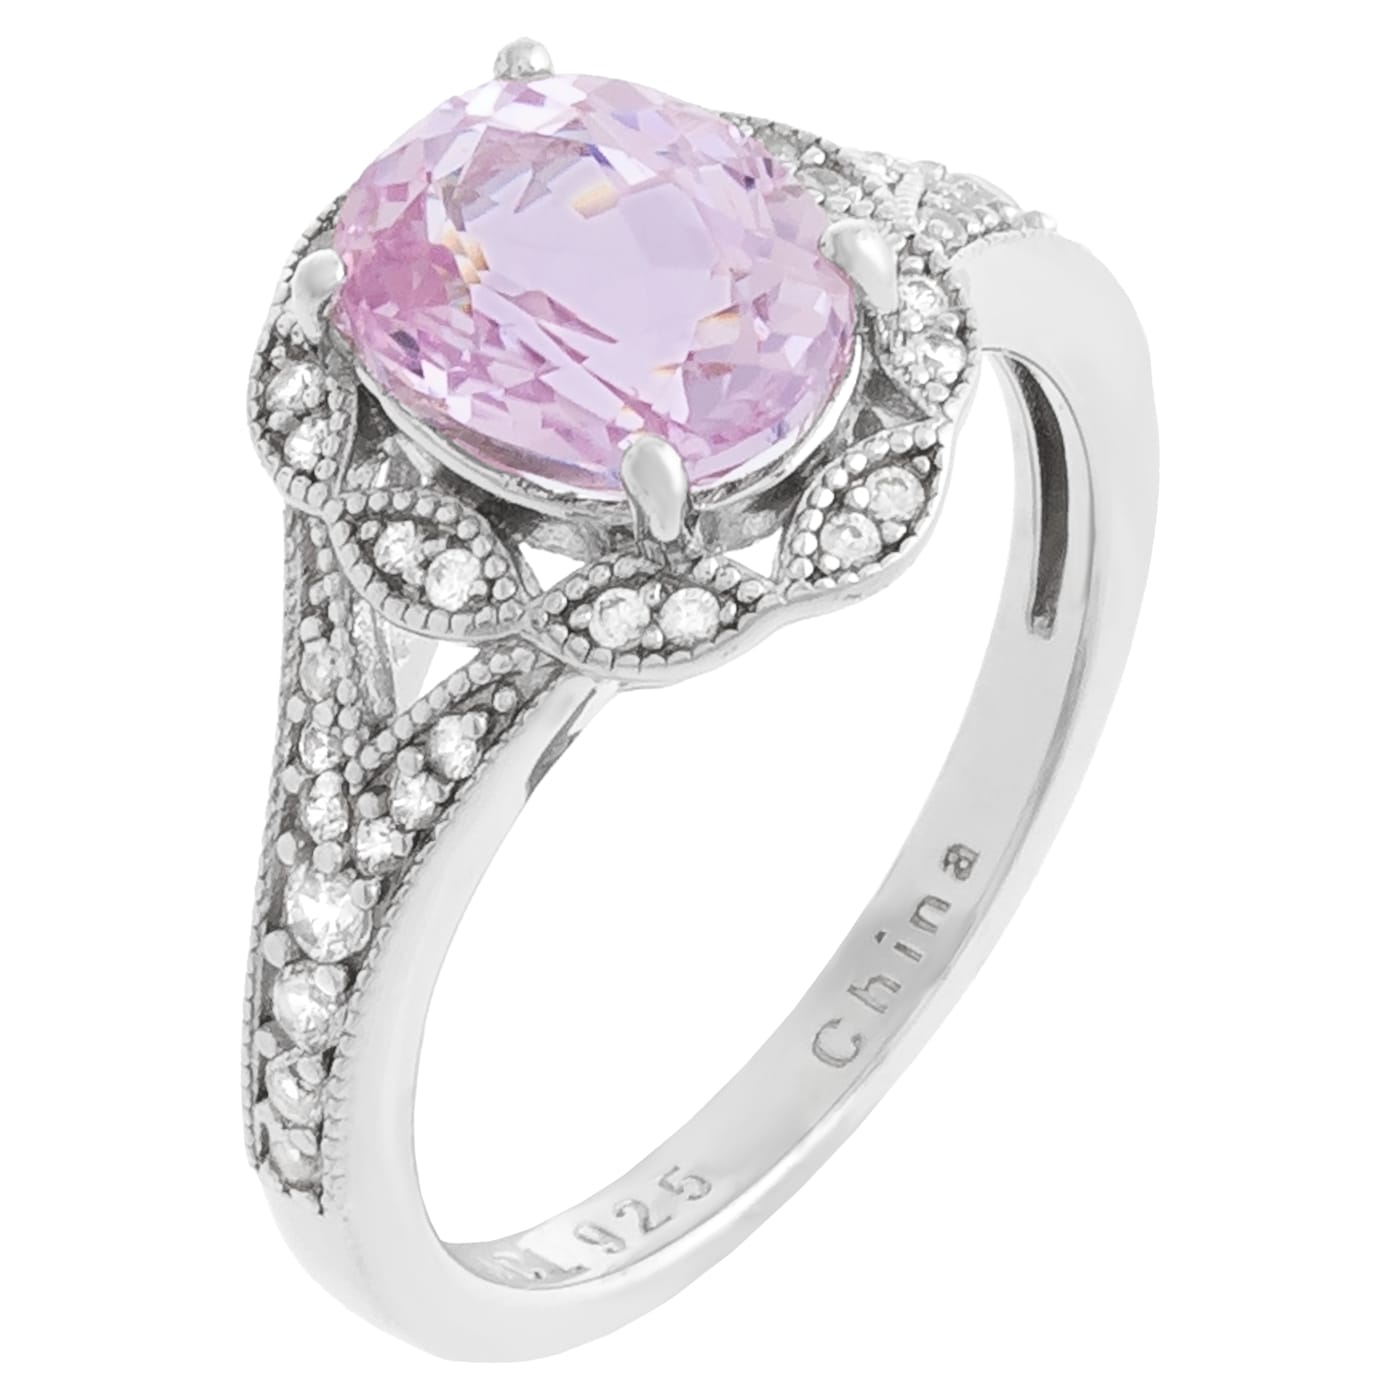 2.55 cttw Kunzite Engagement Ring, Rhodium Plated on Sterling